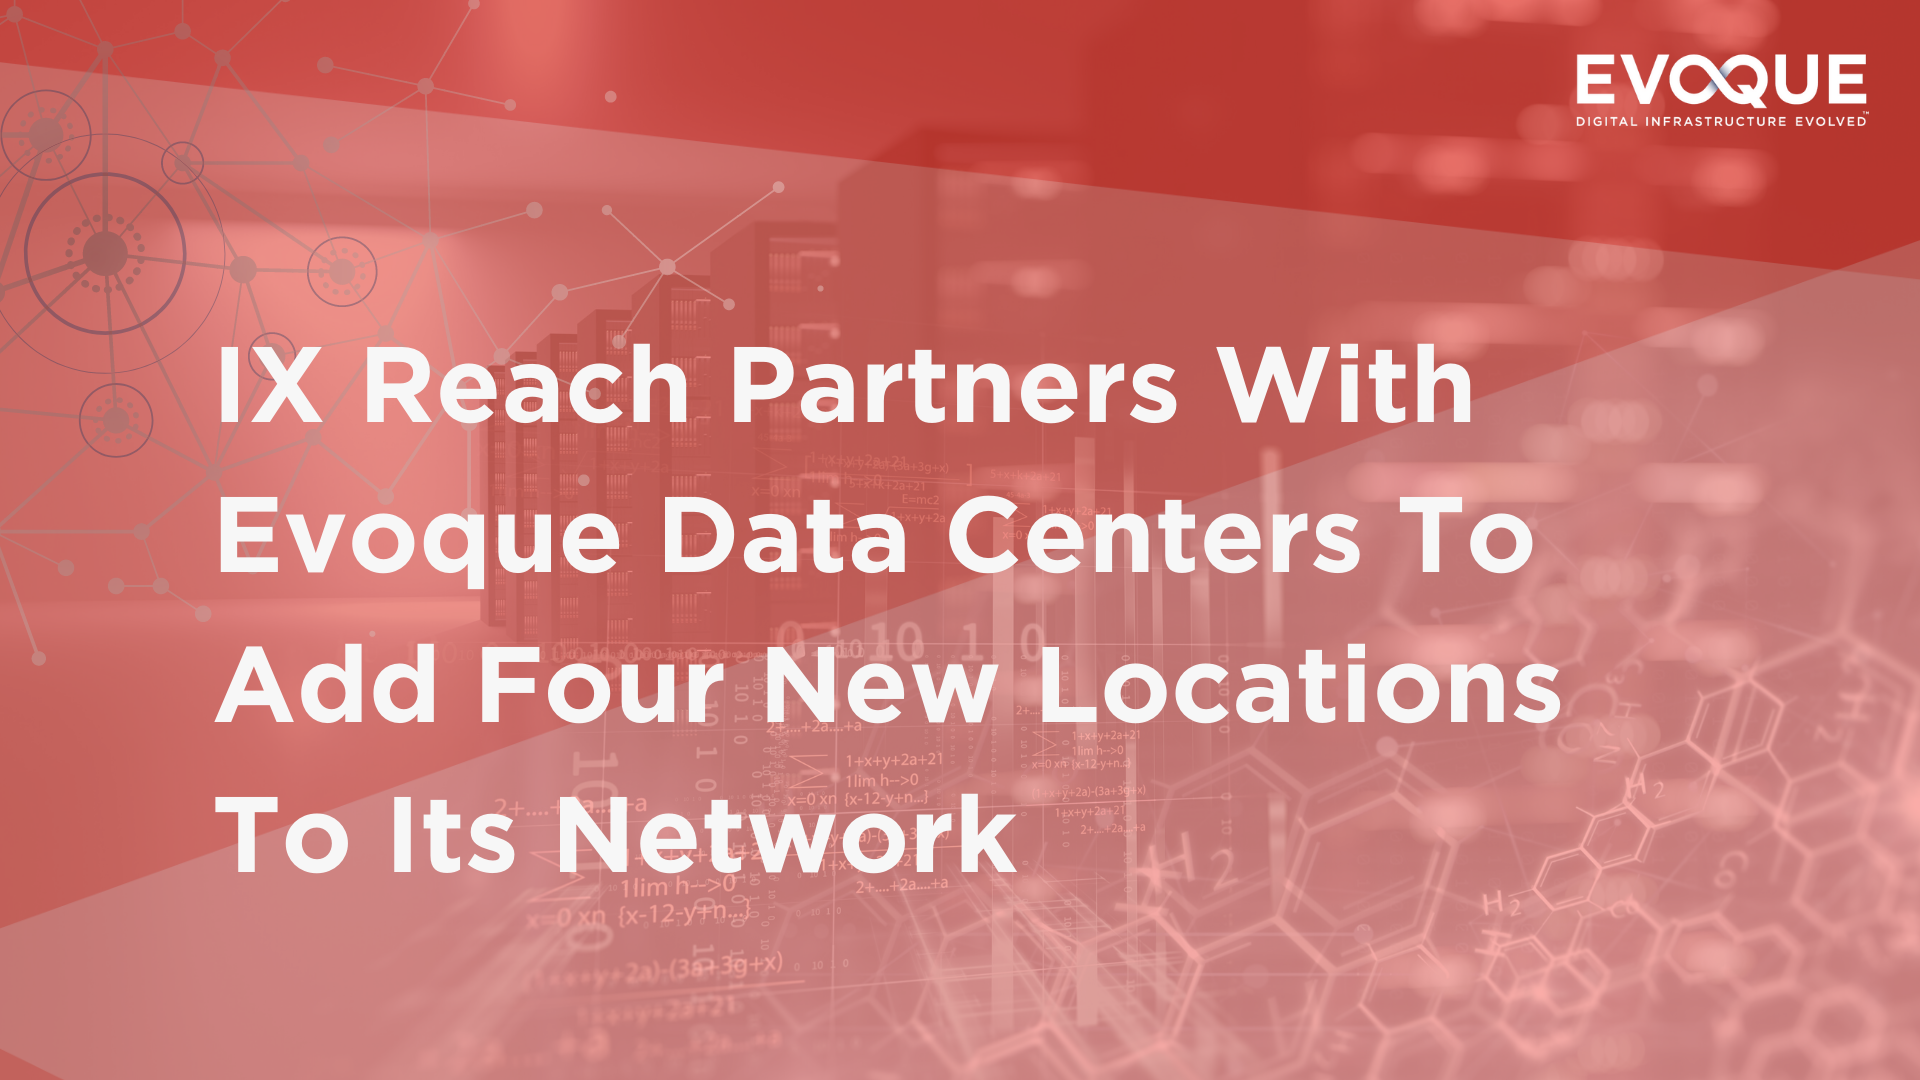 IX Reach Partners With Evoque Data Centers To Add Four New Locations To Its Network